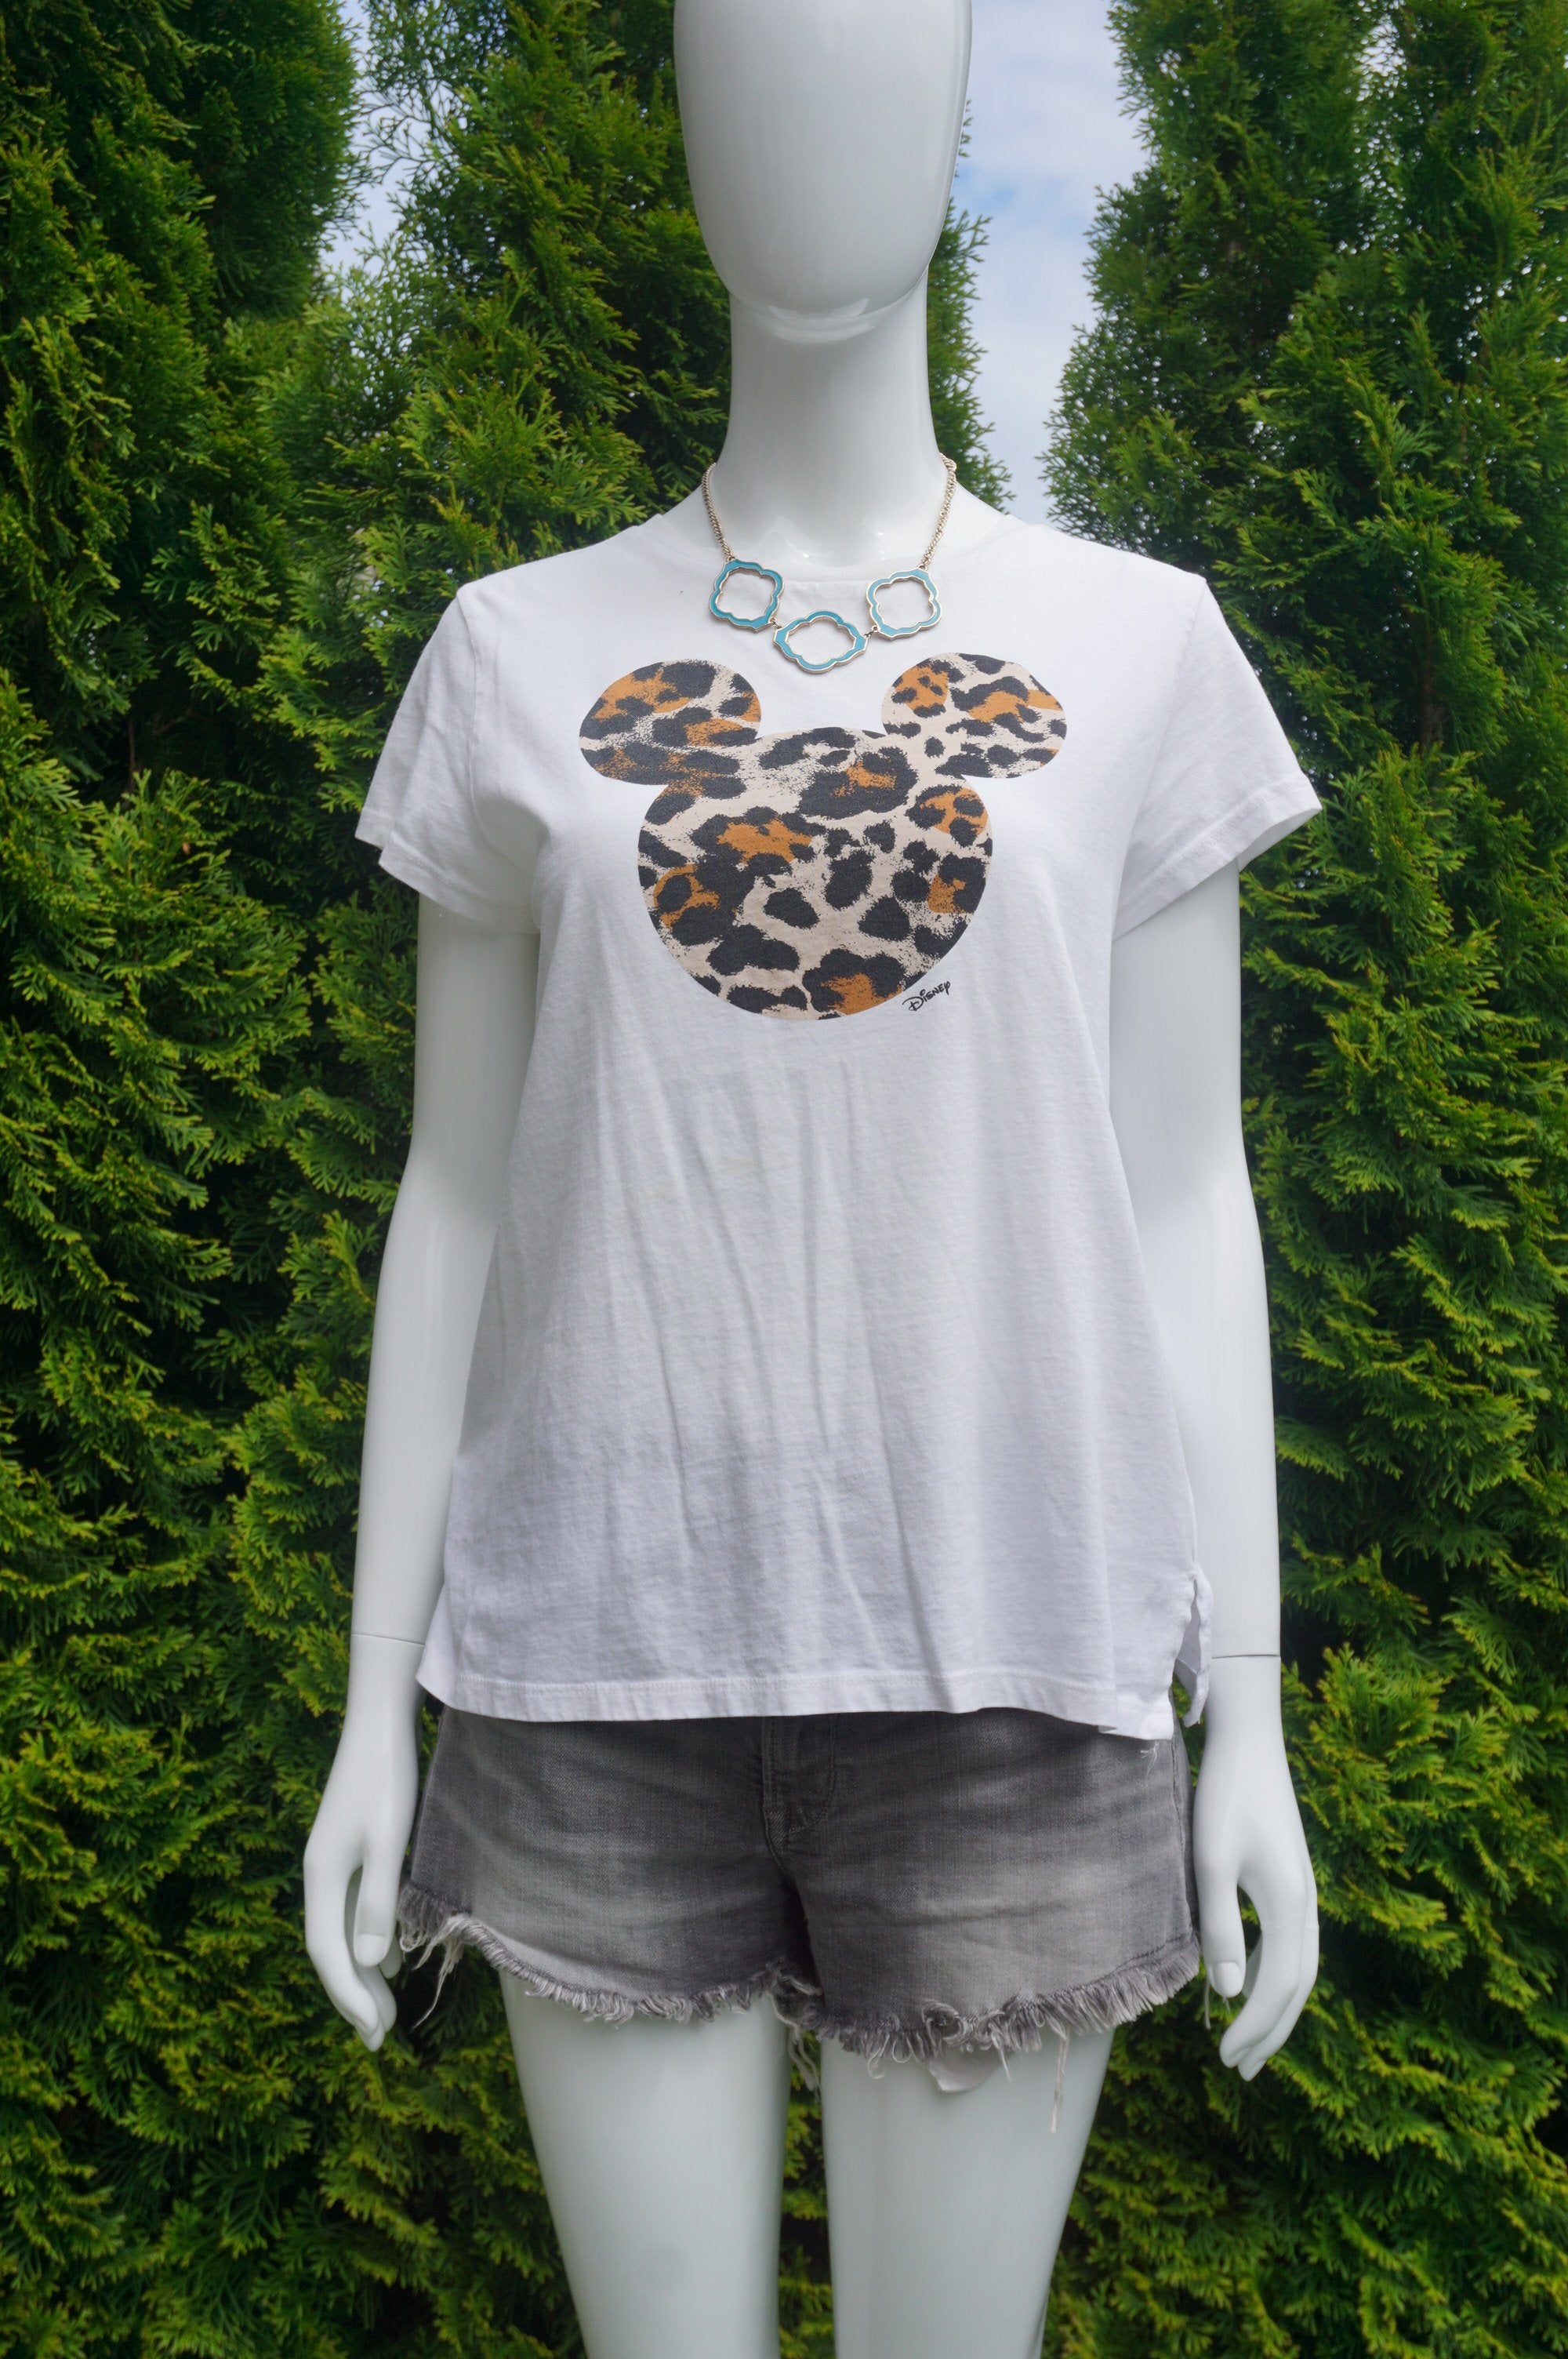 H&M Leopard Print Mickey Mouse T-shirt, Cute t-shirt with unique leopard print Mickey Mouse. Try wearing it tucked in with a pair of casual jeans., White, 100% Cotton, women's Tops, women's White Tops, H&M women's Tops, mickey mouse t-shirt, leopard print Disney mickey mouse t-shirt. Leopard mickey mouse, Disney t-shirt